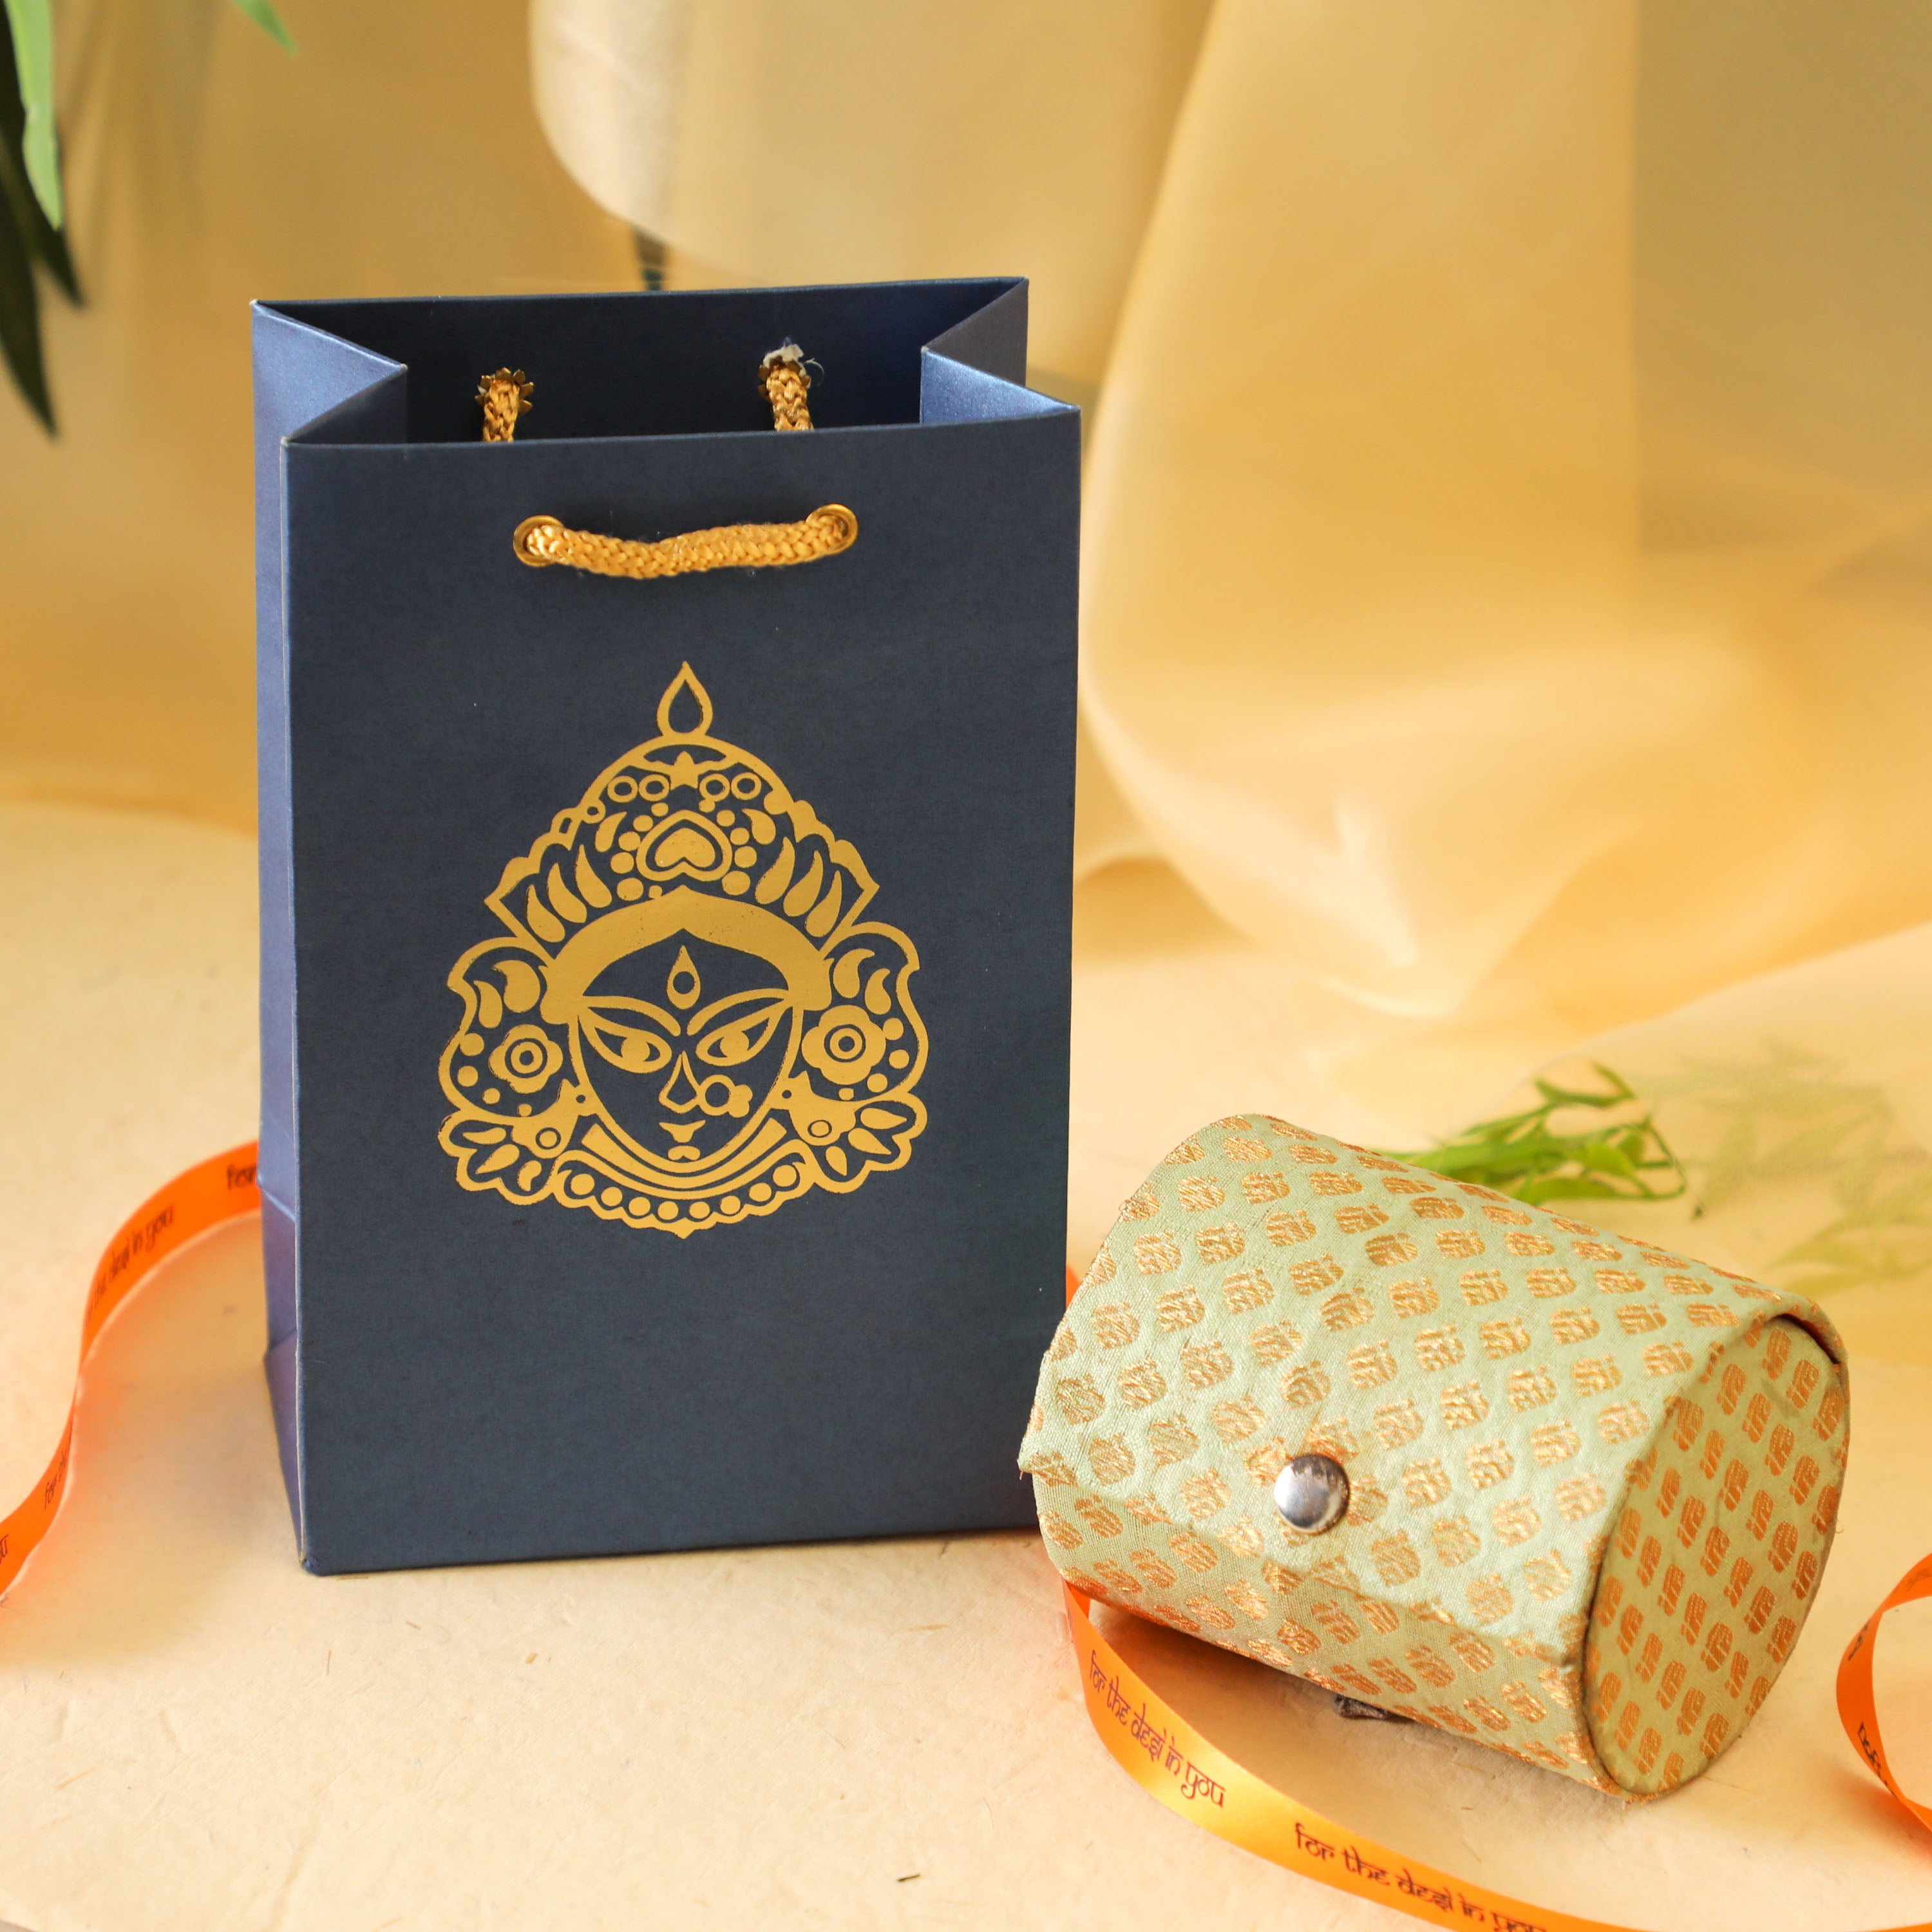 Vriddhi Gifts and Wrapping Lounge